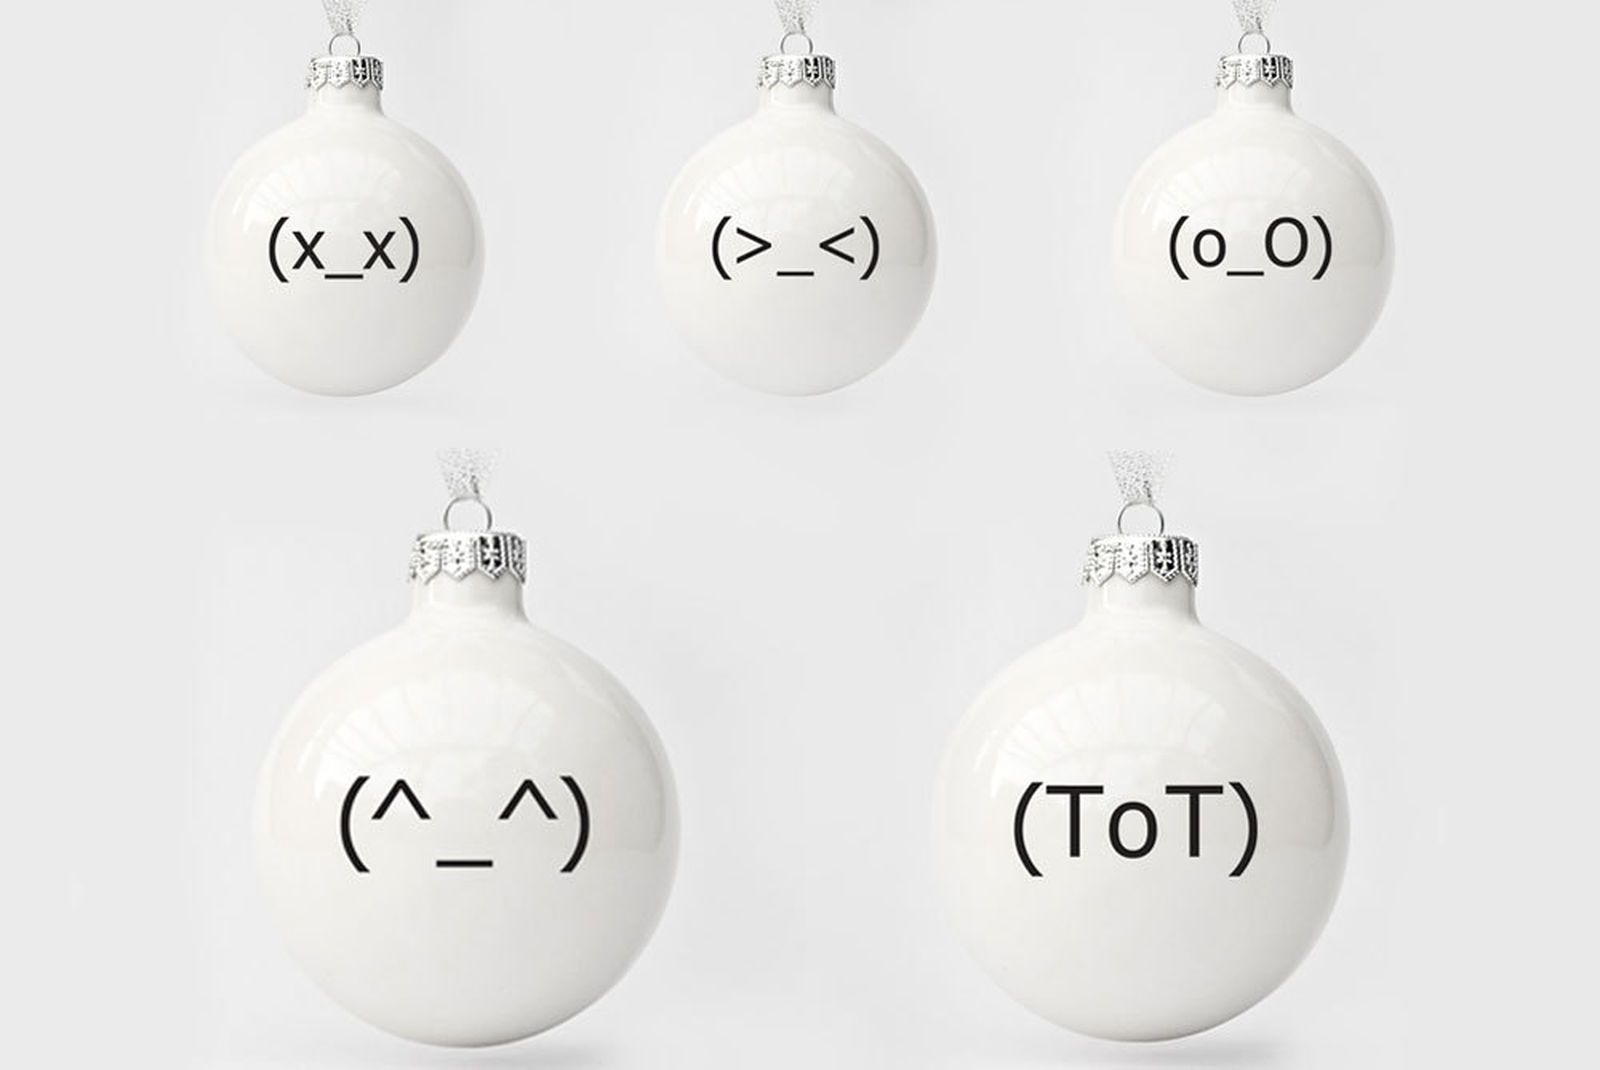 13 Best Christmas Decorations Every Geek Should Own image 12